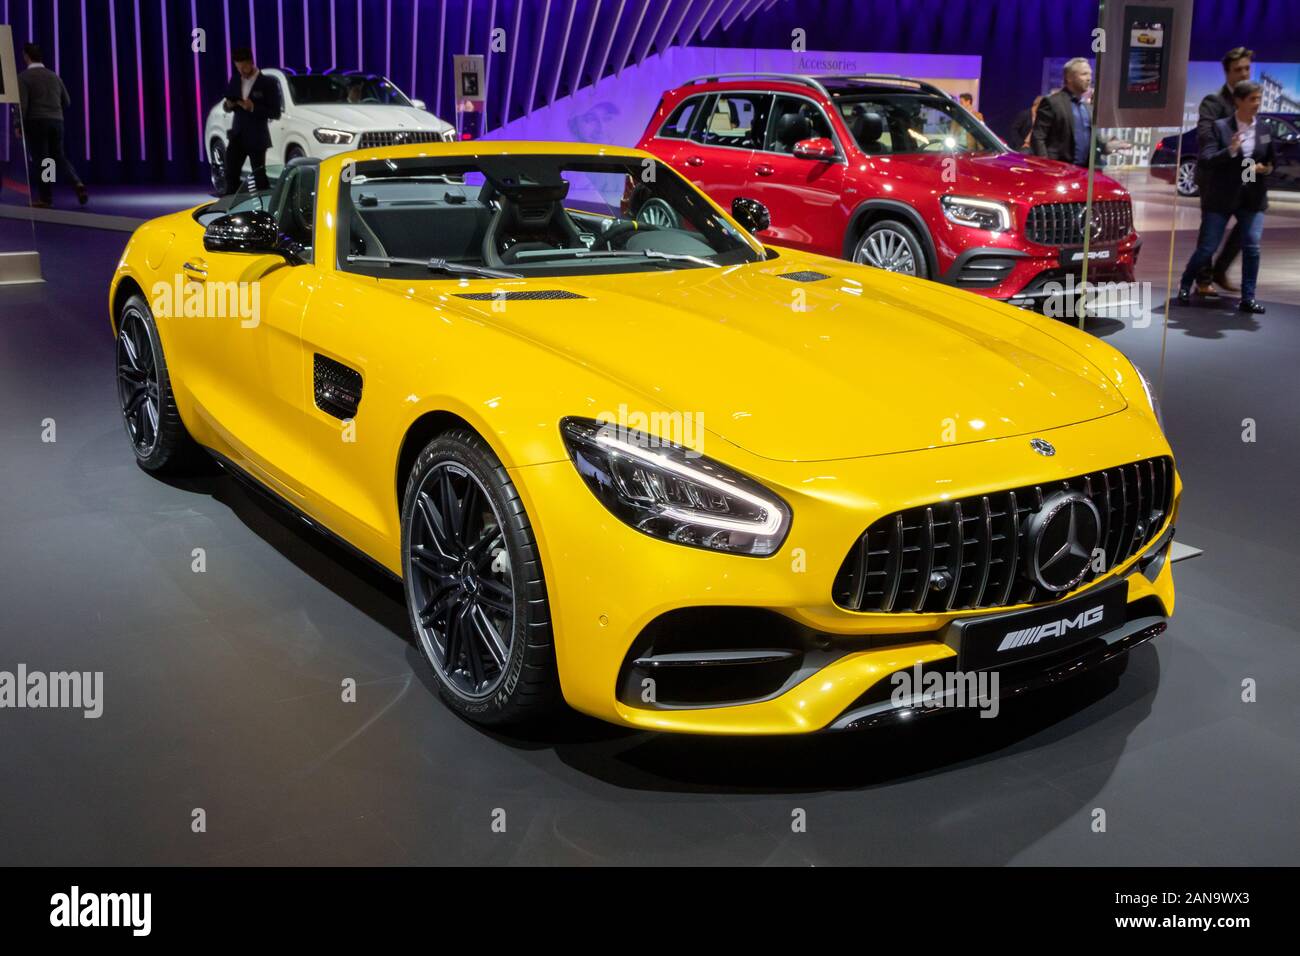 BRUSSELS - JAN 9, 2020: Mercedes AMG GT Roadster sports car presented at the Brussels Autosalon 2020 Motor Show. Stock Photo